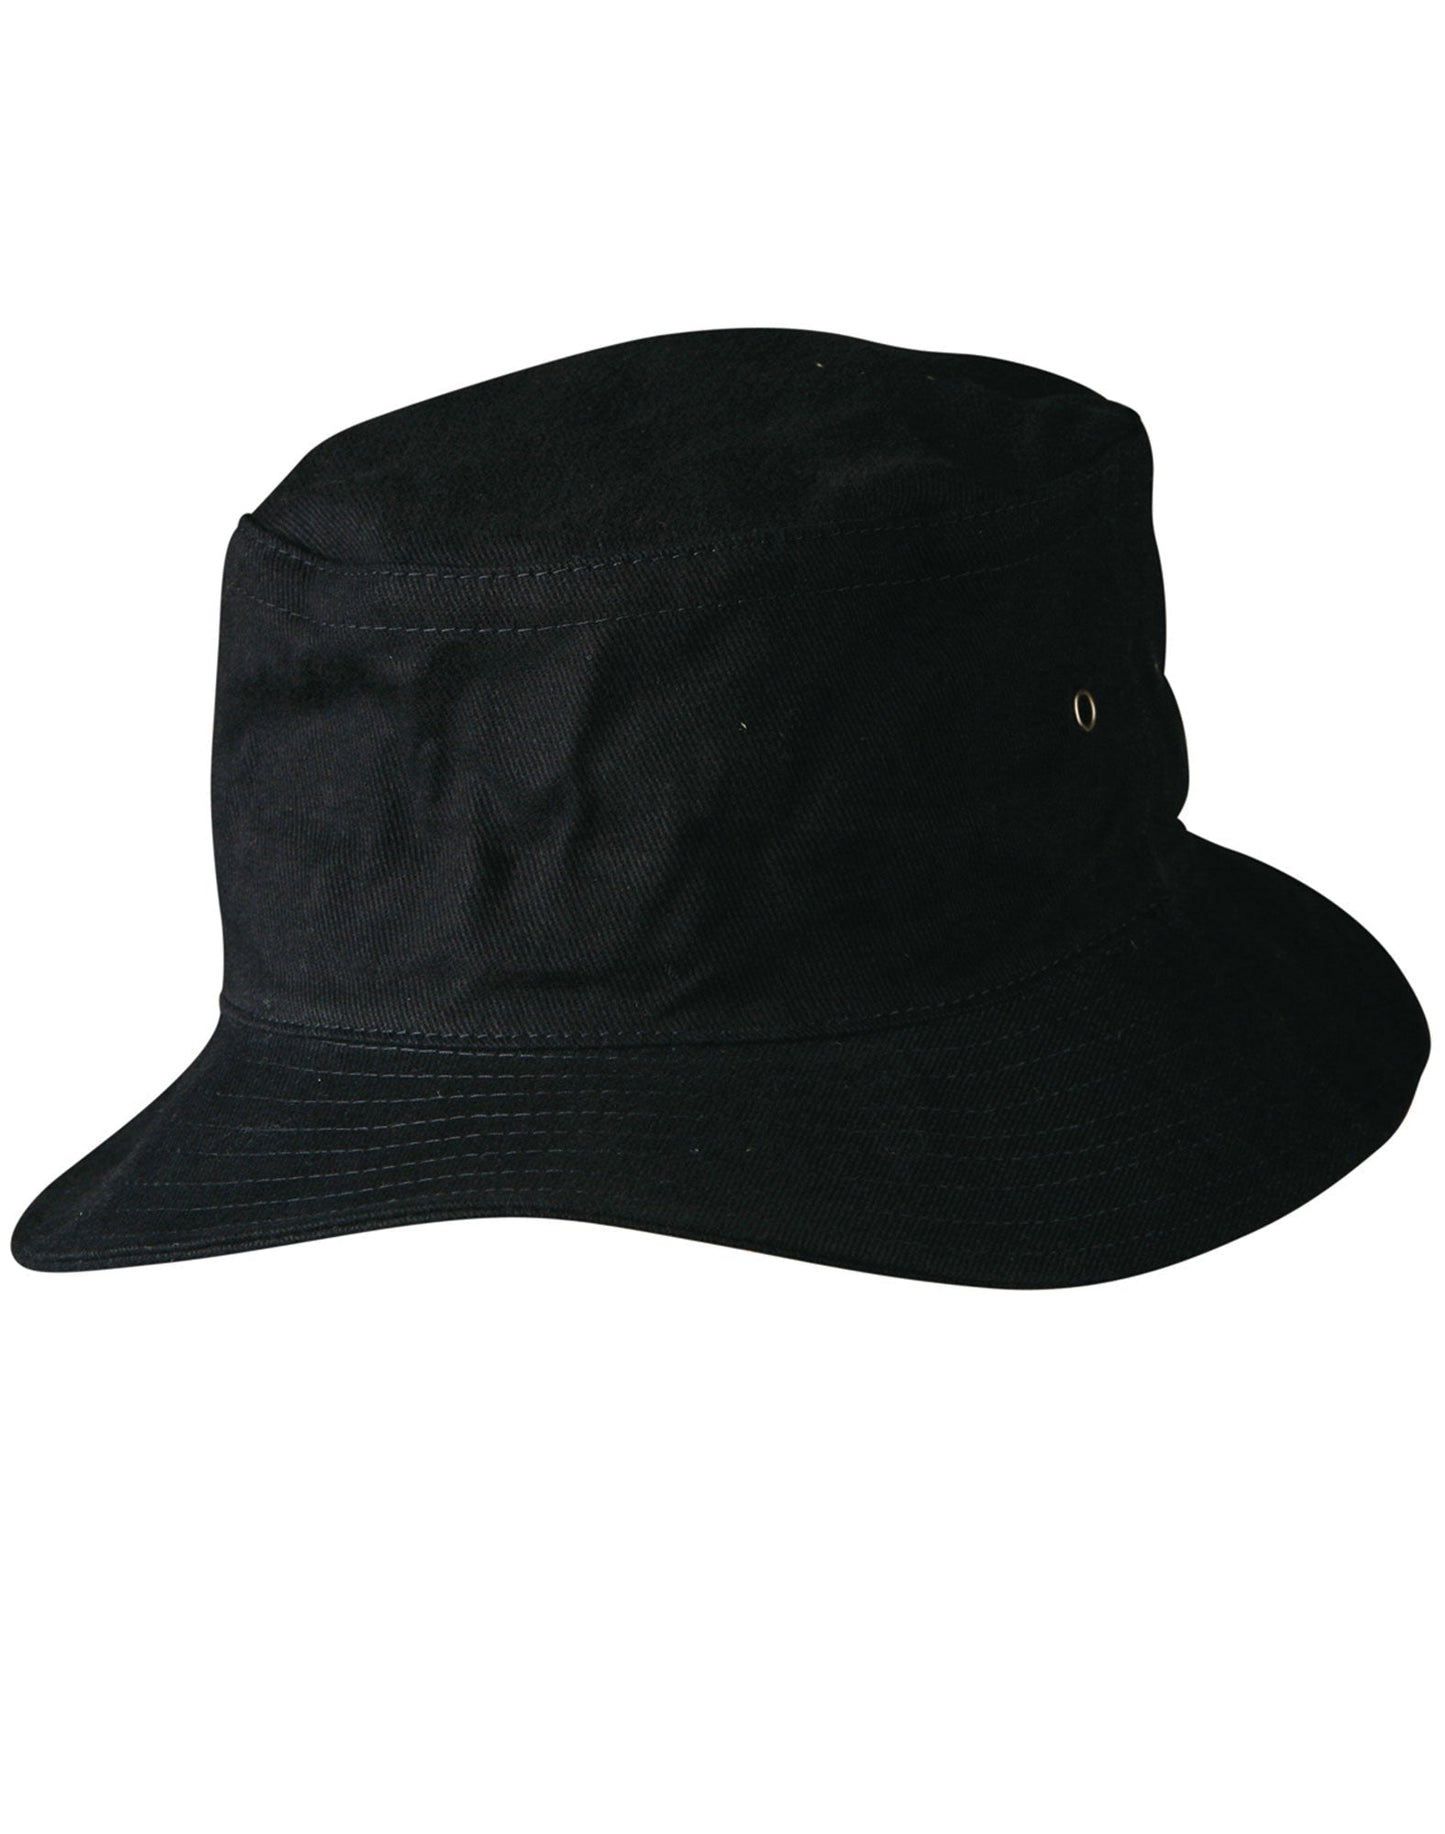 Aboriginal Soft Cotton Bucket Hat 60,000 Years and Counting